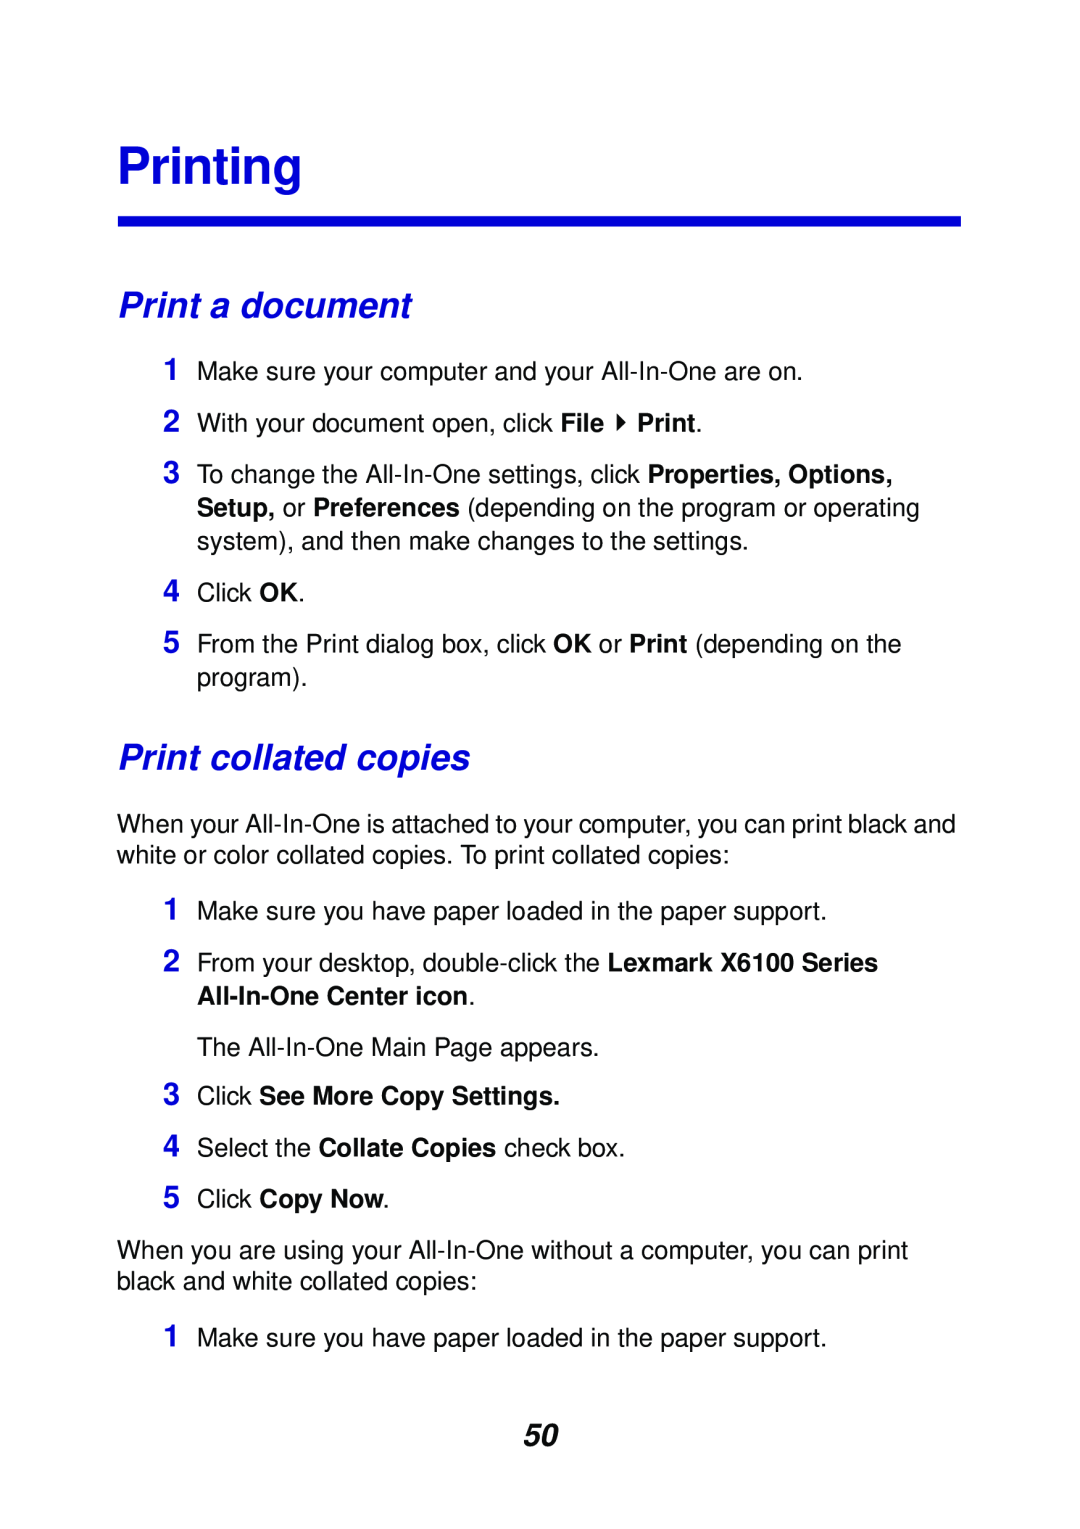 Lexmark X6100 manual Printing, Print a document, Print collated copies, 3Click See More Copy Settings, 5Click Copy Now 